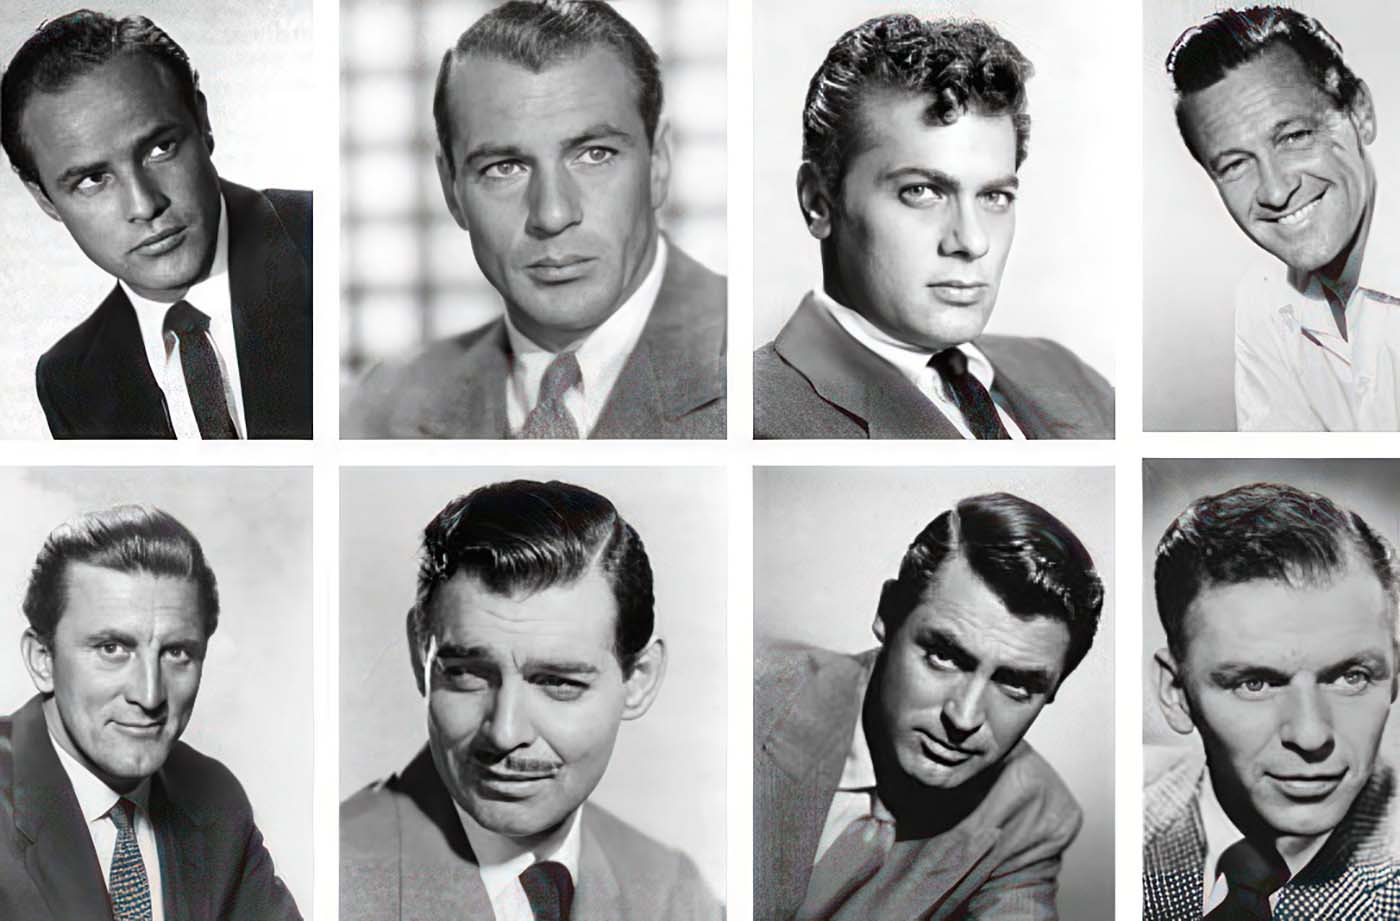 Vintage Men’s Hairstyles: Time-Traveling Through Retro Cuts